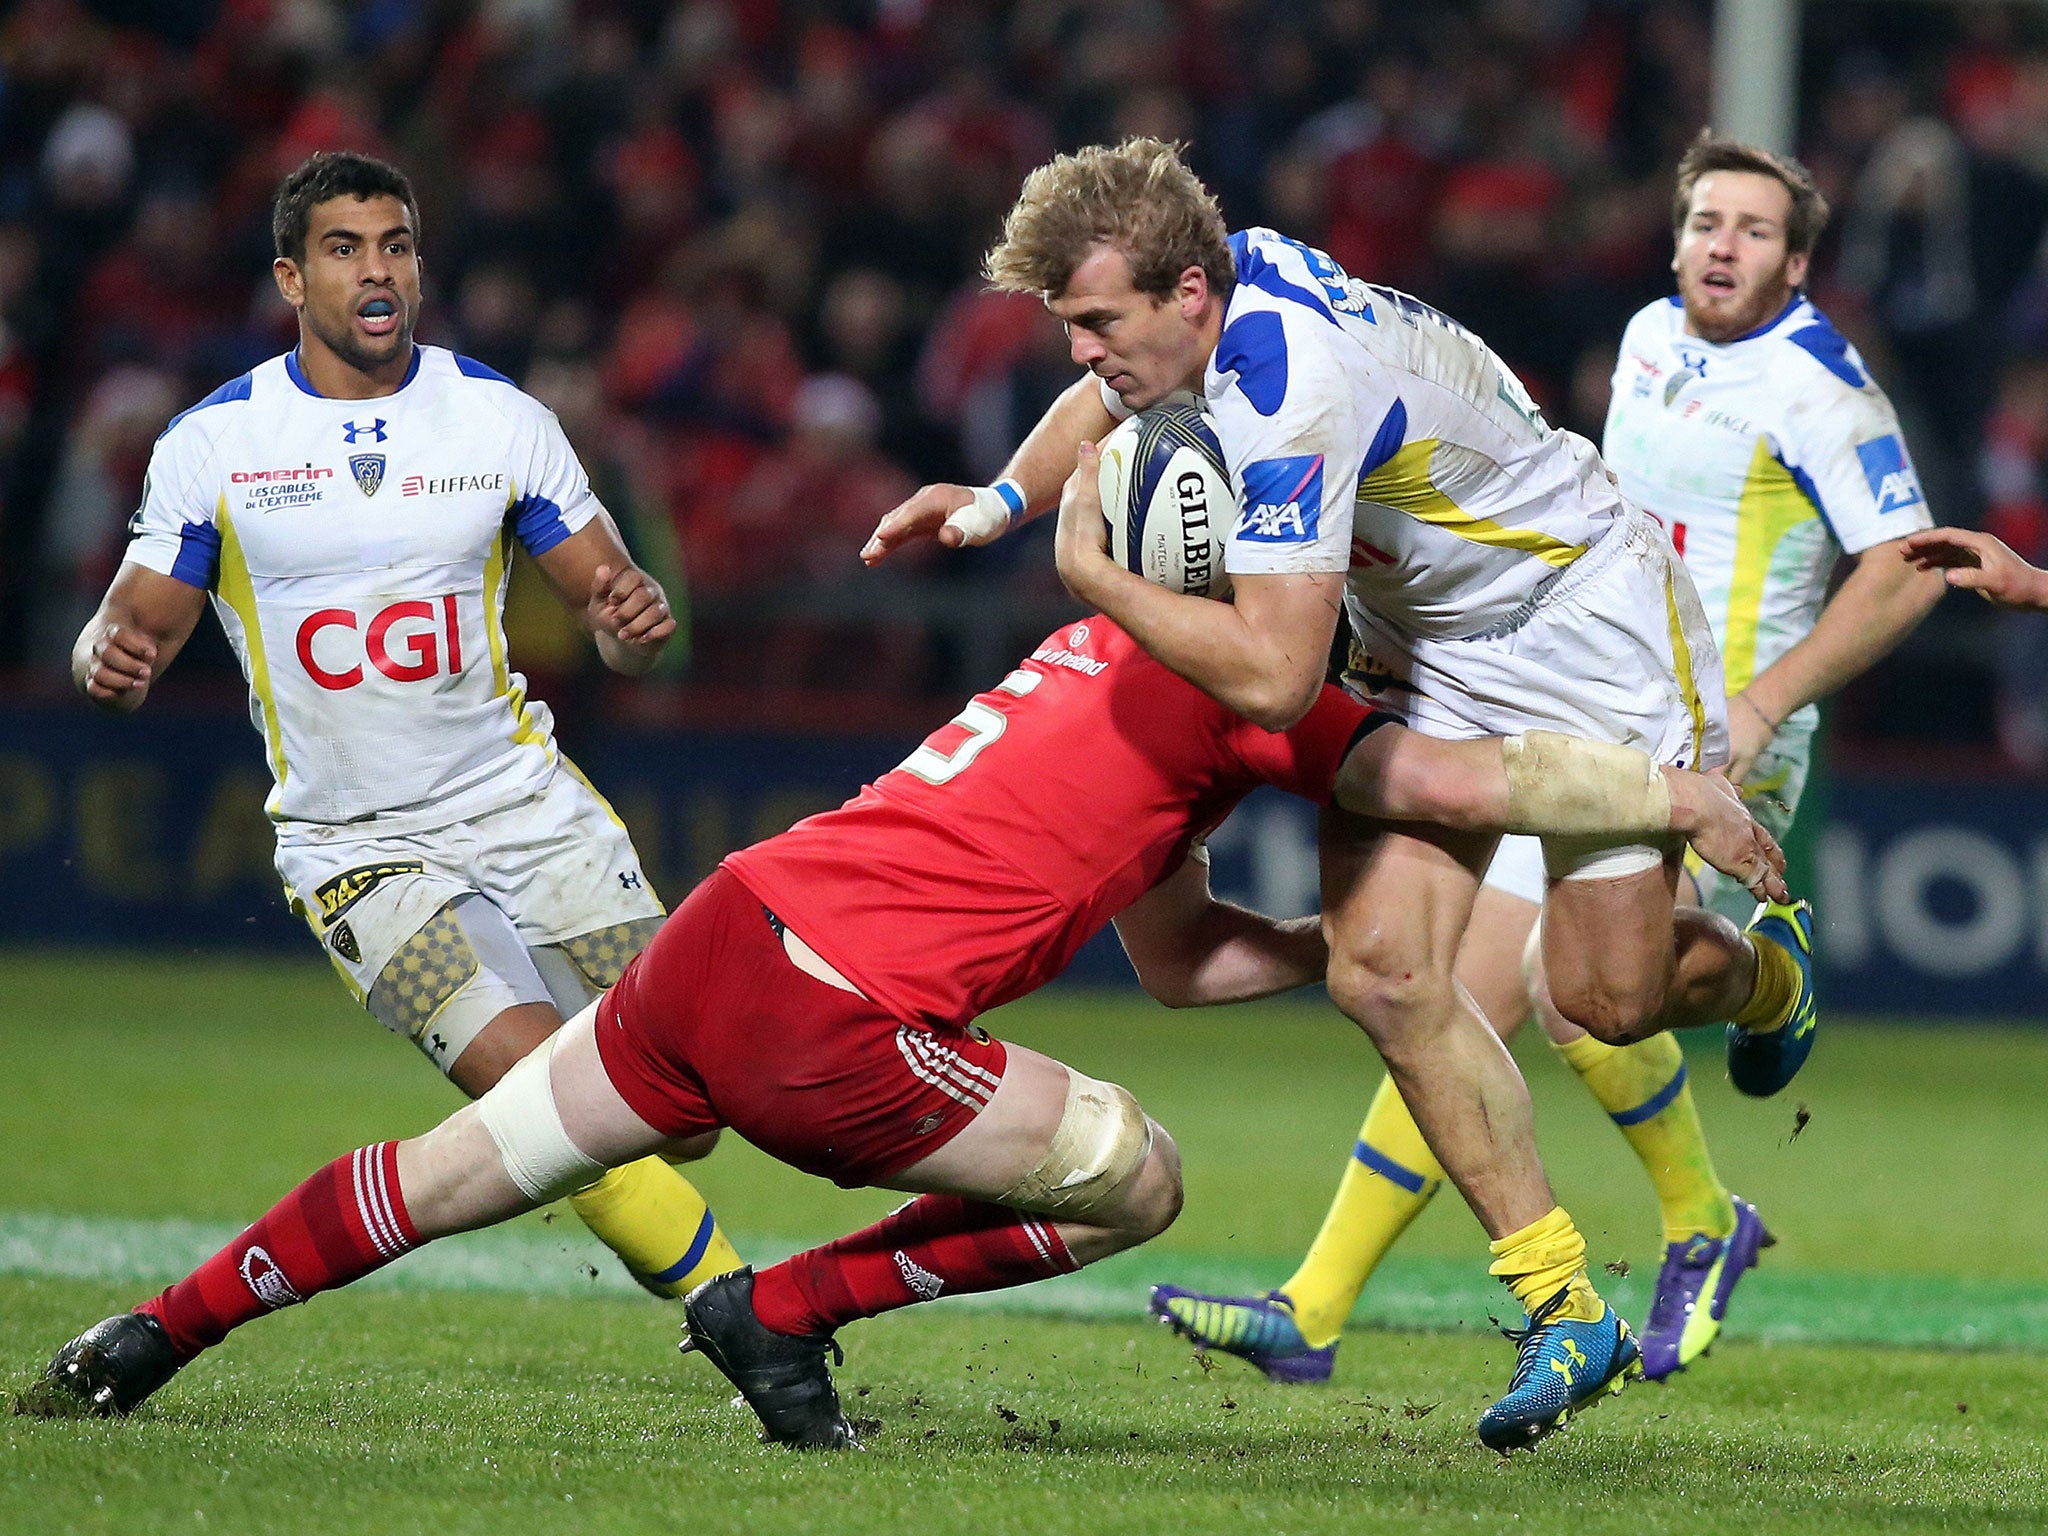 Peter O'Mahony tackles Aurelien Rougerie